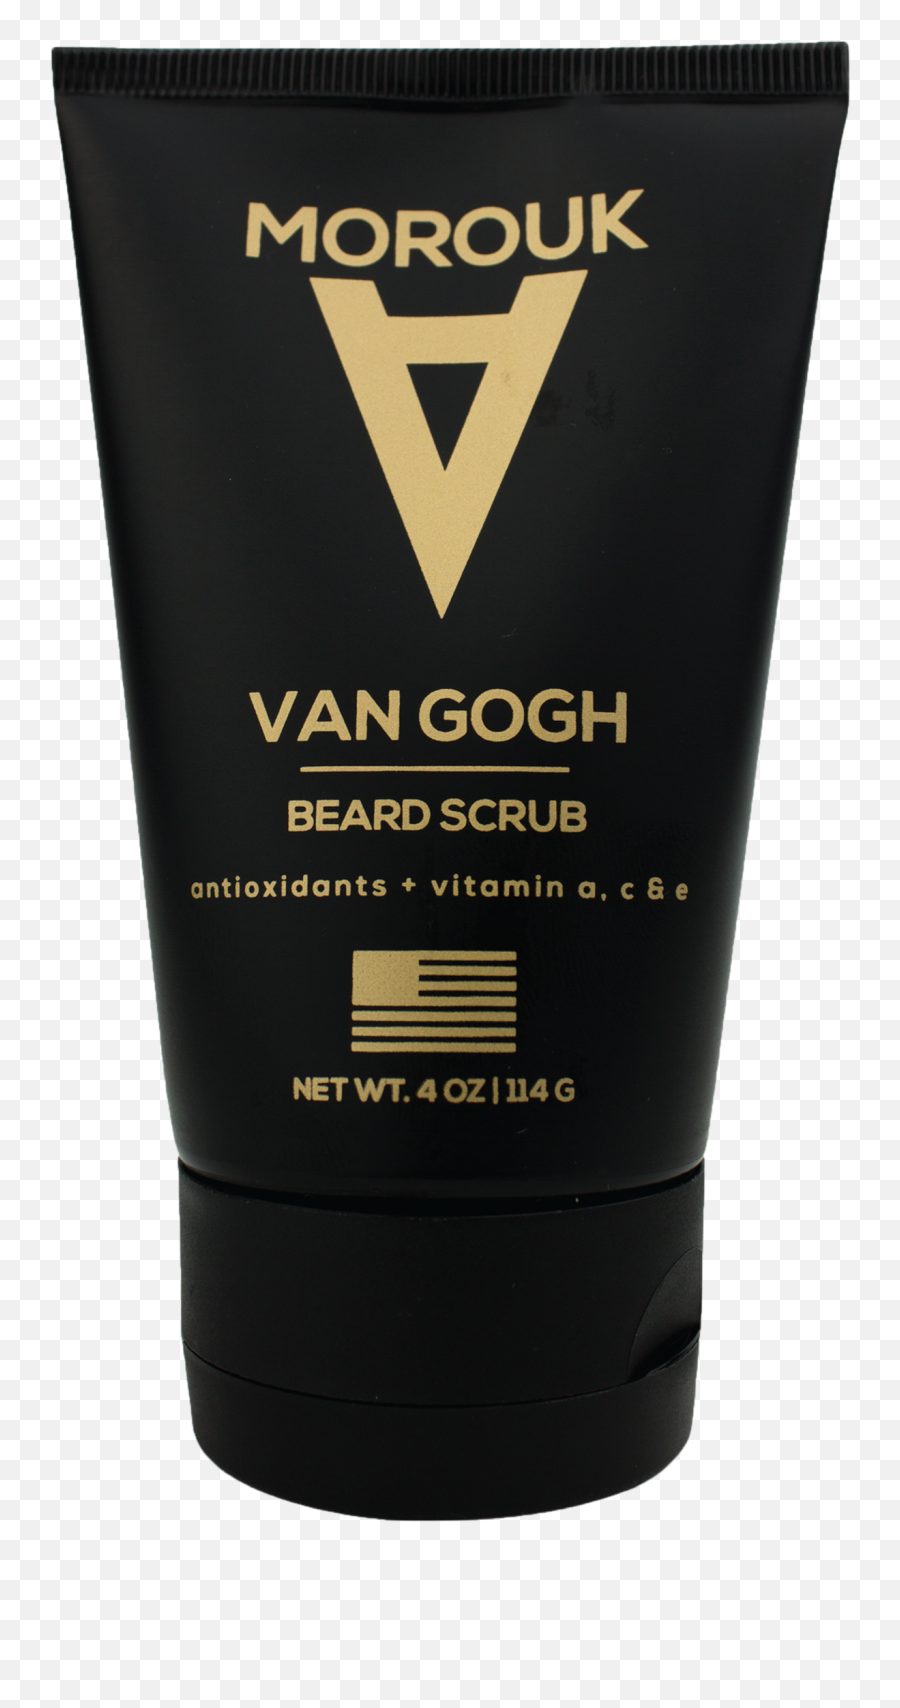 Van Gogh Beard And Face Scrub - For Men Emoji,How To Make A Presentation Showing Emotion About Van Gogh